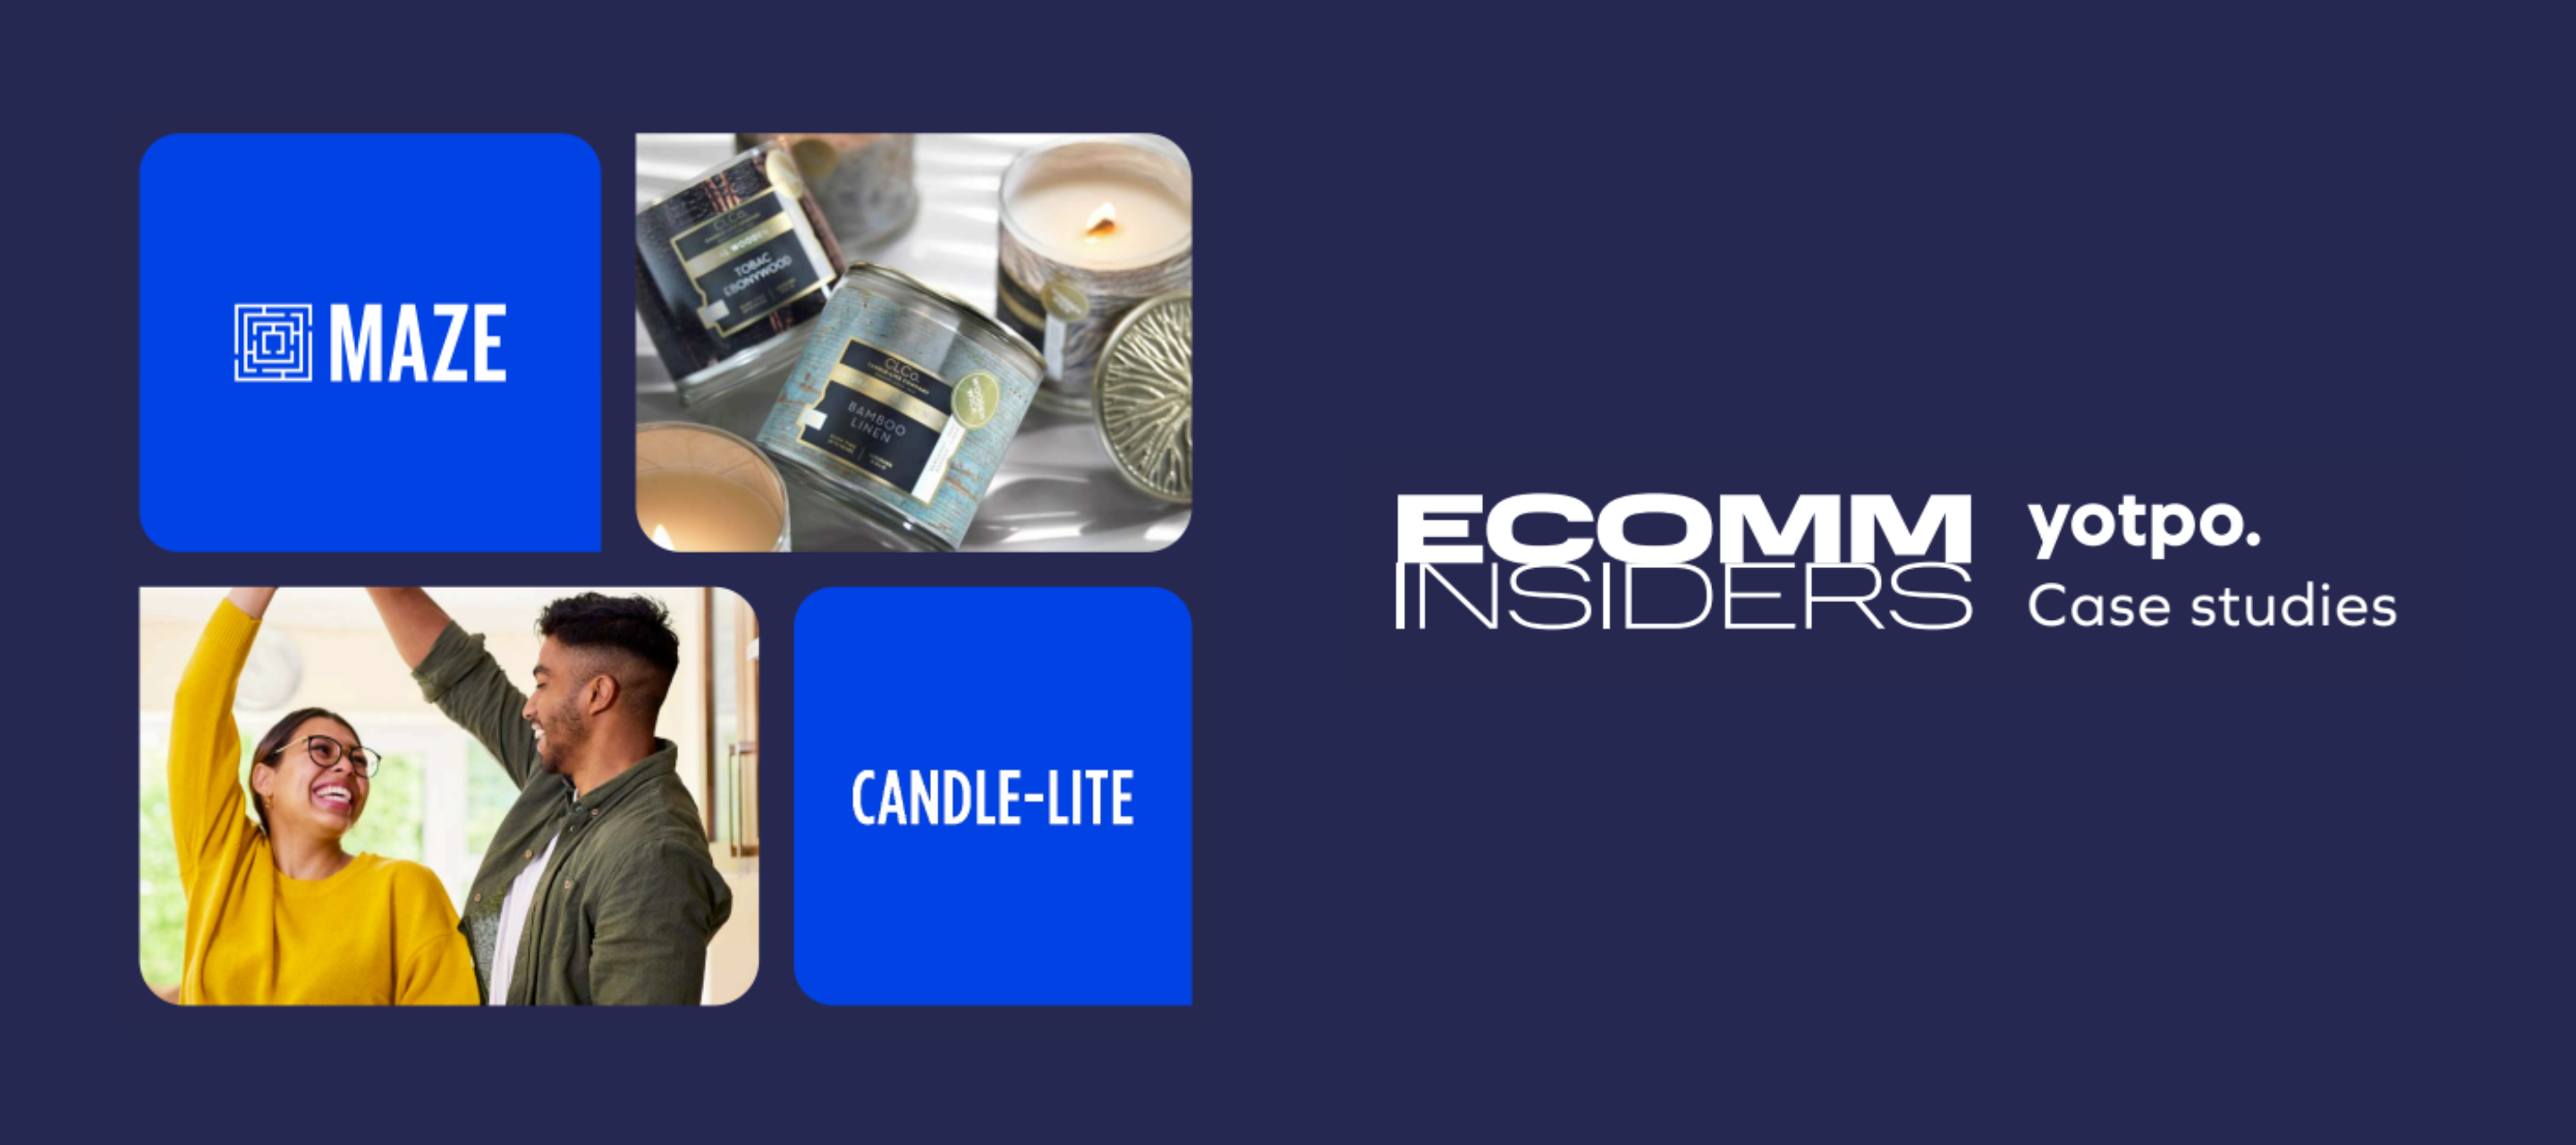 Mini Case Study | The Maze Group builds a D2C business for Candle-lite with Yotpo solutions